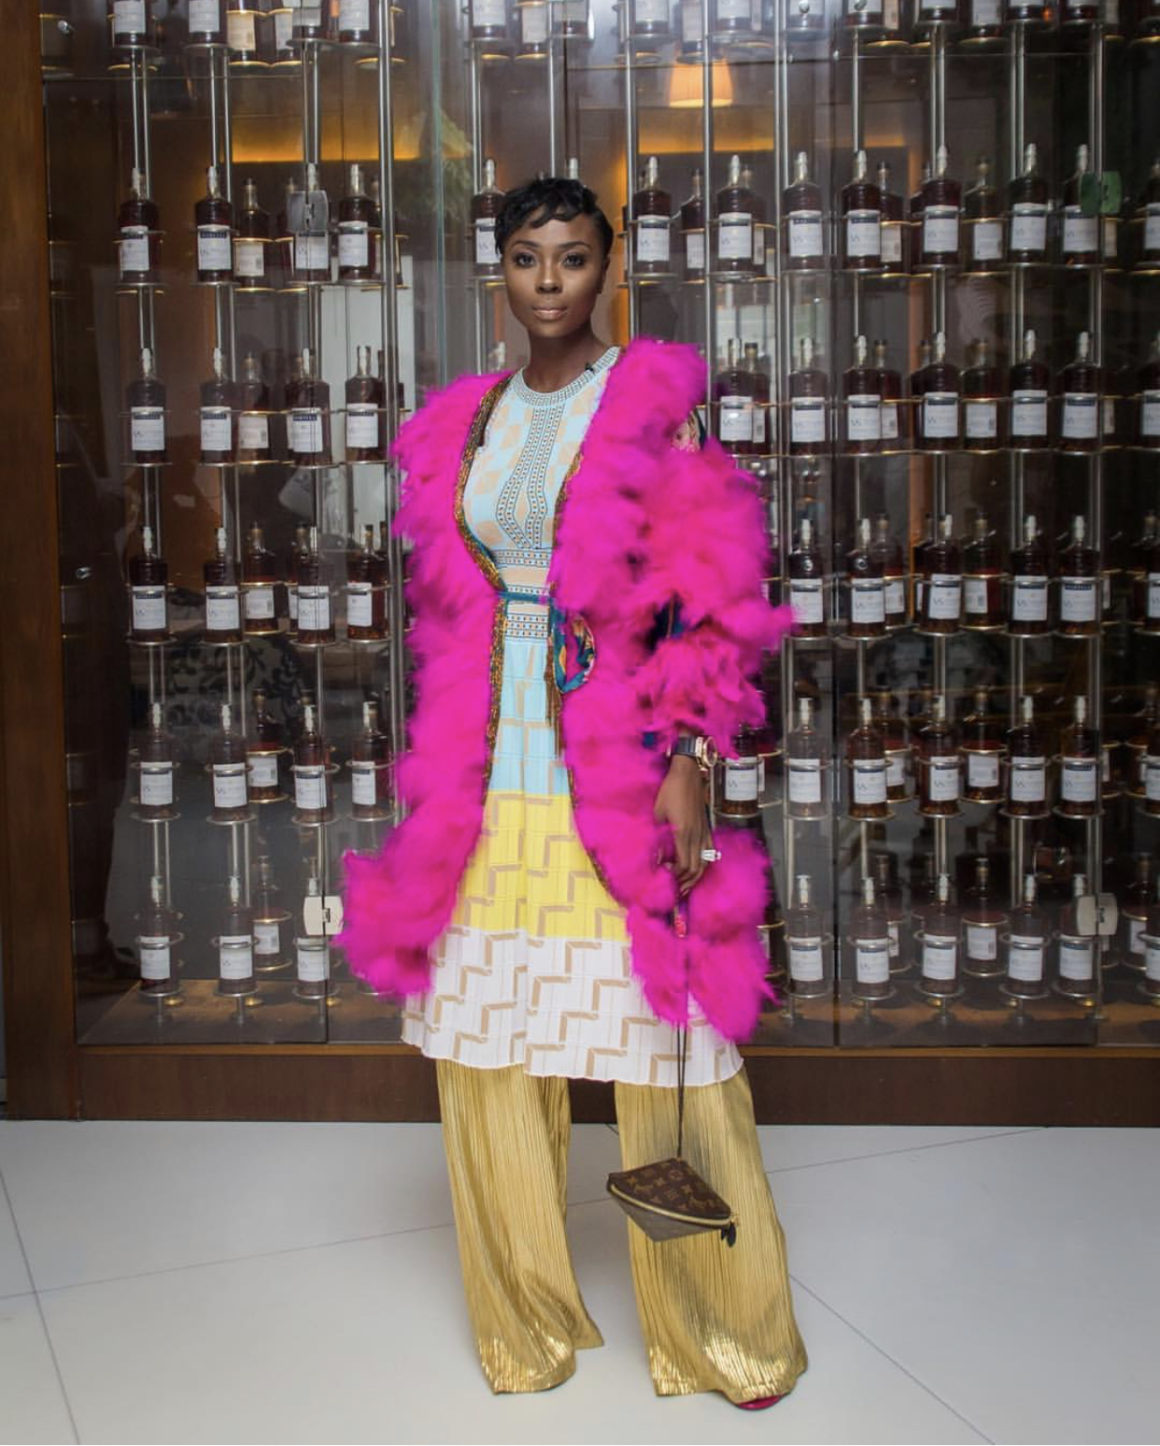 Fashion Bombshell of the Day: Julez from Nigeria